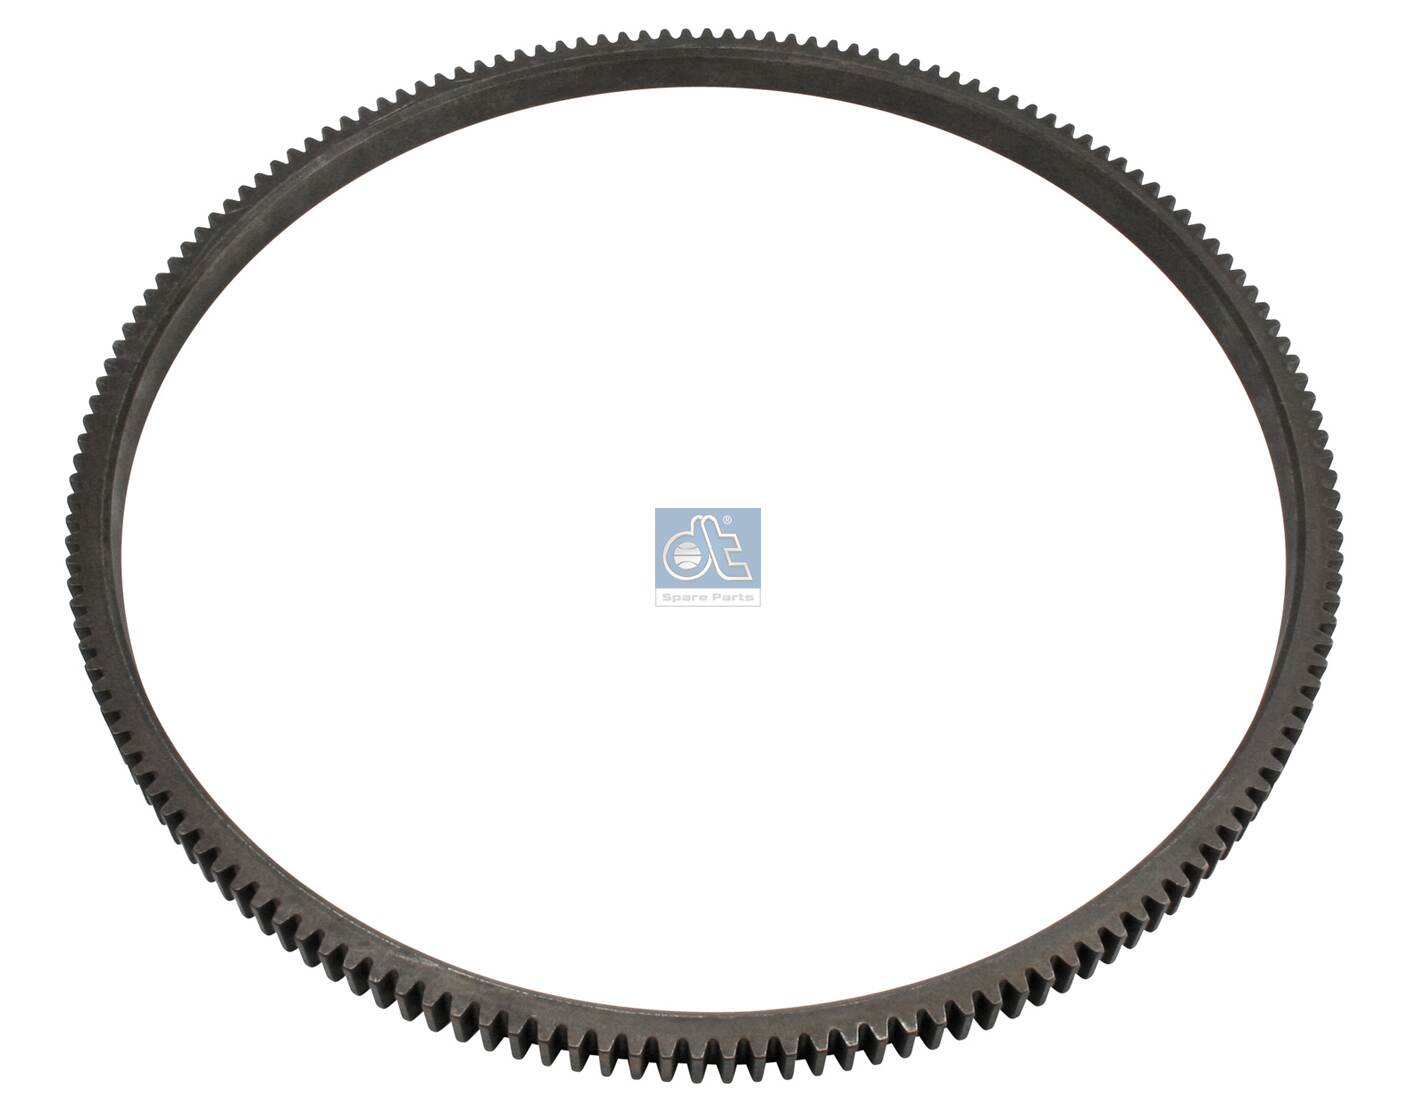 2.10072, Ring Gear, flywheel, DT Spare Parts, 420794, 423082, 033.199, 08.160.4004.510, 11592, 123.184, 20090410010, 310900, 5340420794, 58449, 88.50.0058, 04305002, 20.0904.10010, 38173, 4004.51, 38173COS, 1045530052A, 45.33.1052, 45330052, 45330052L, 010578, GR-794, T78204